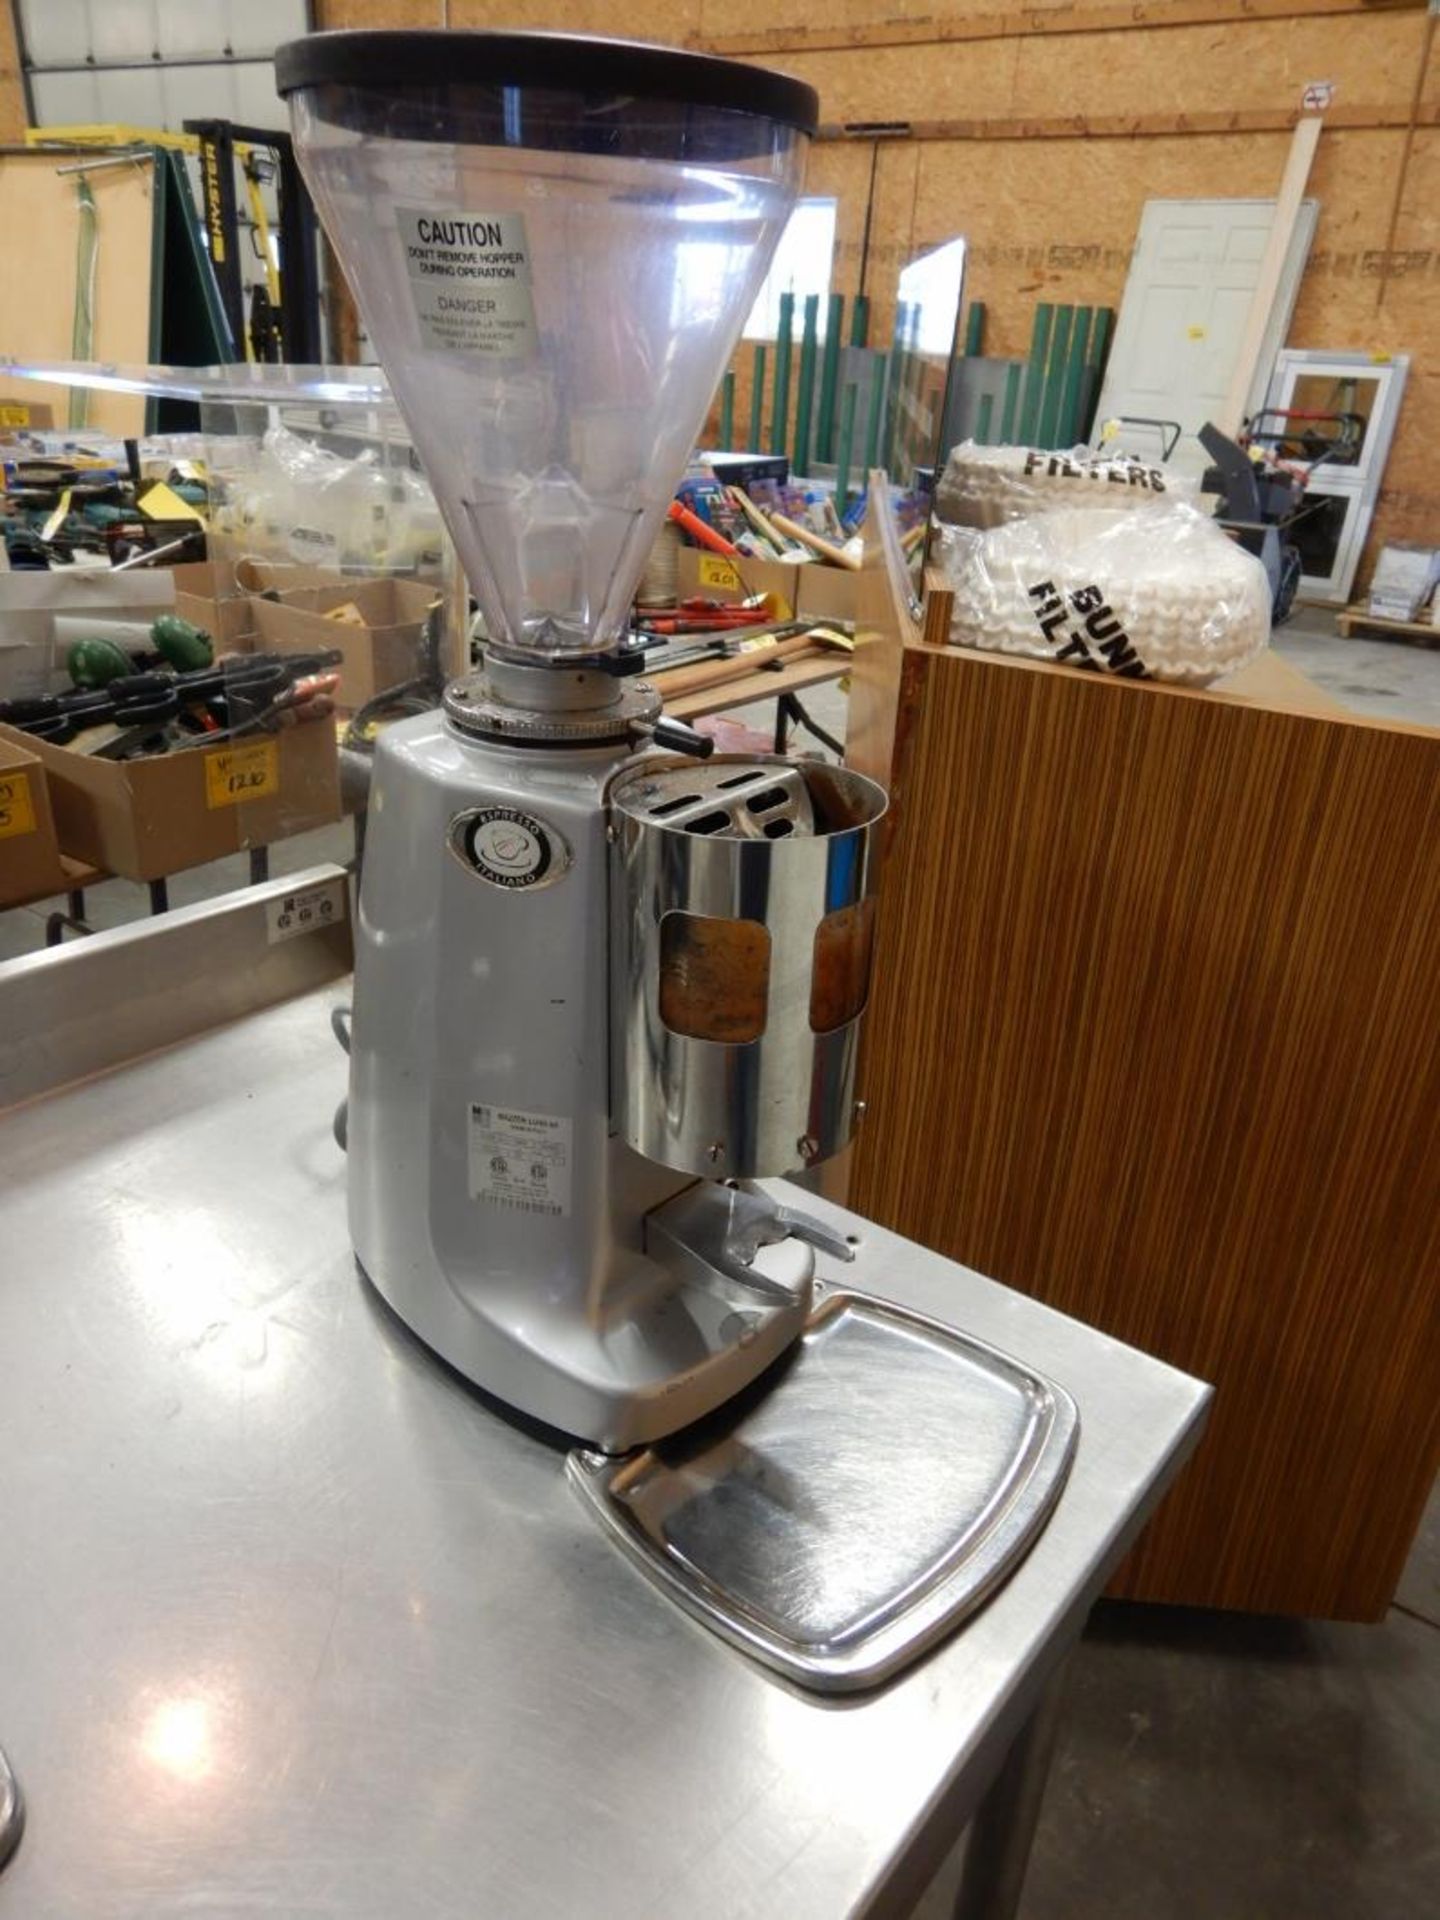 MAZZER SUPER JOLLY TIMER ELECTRONIC EXPRESSO GRINDER S/N 1204987(RECENTLY SERVICED) - Image 2 of 4